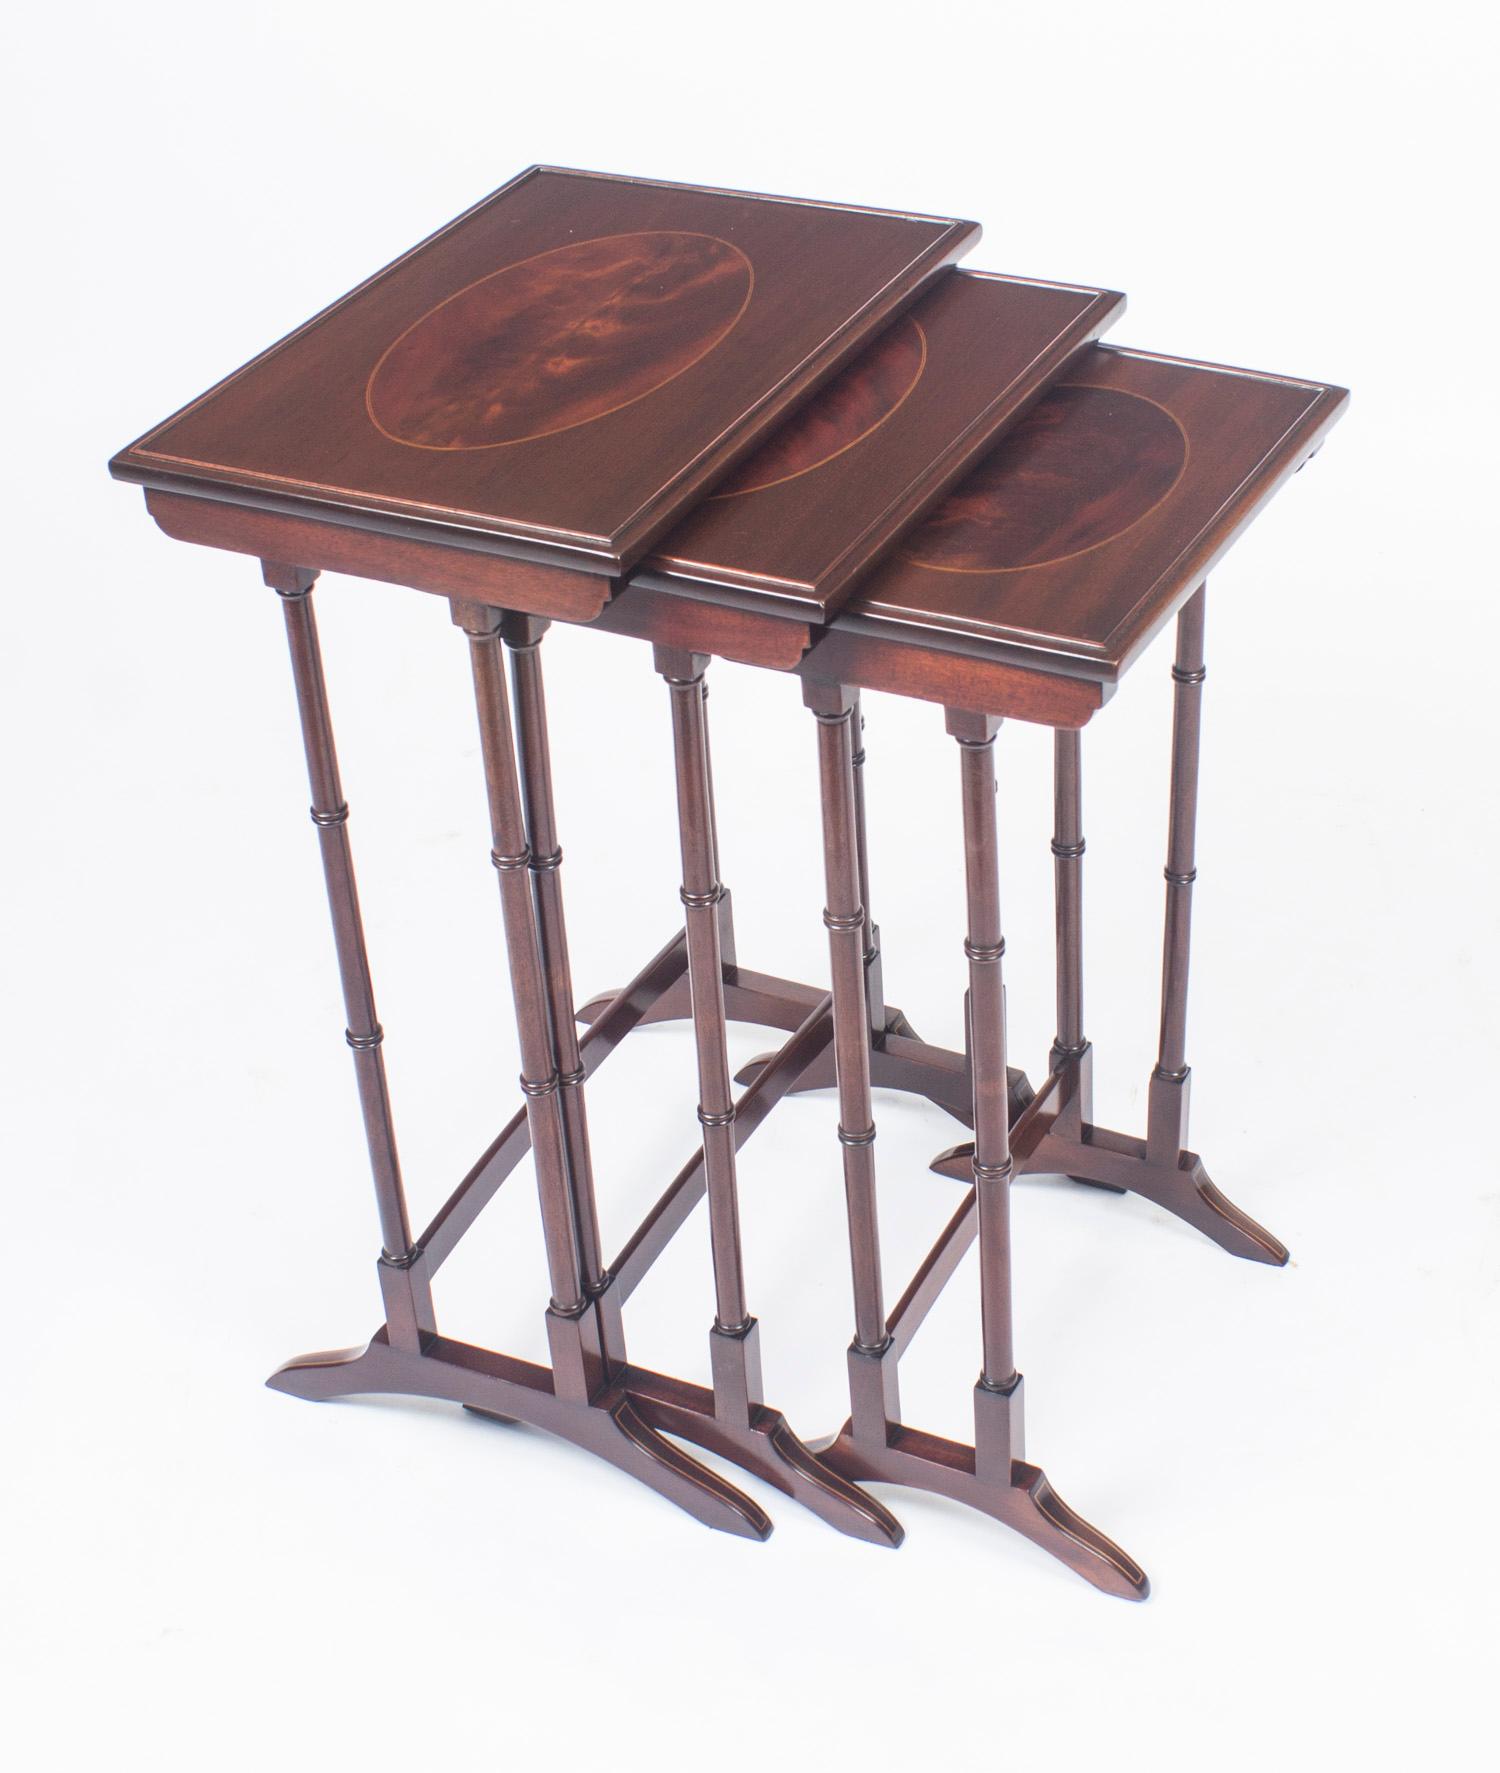 Antique Victorian Mahogany & Inlaid Nest of 3 Tables c.1880 For Sale 3